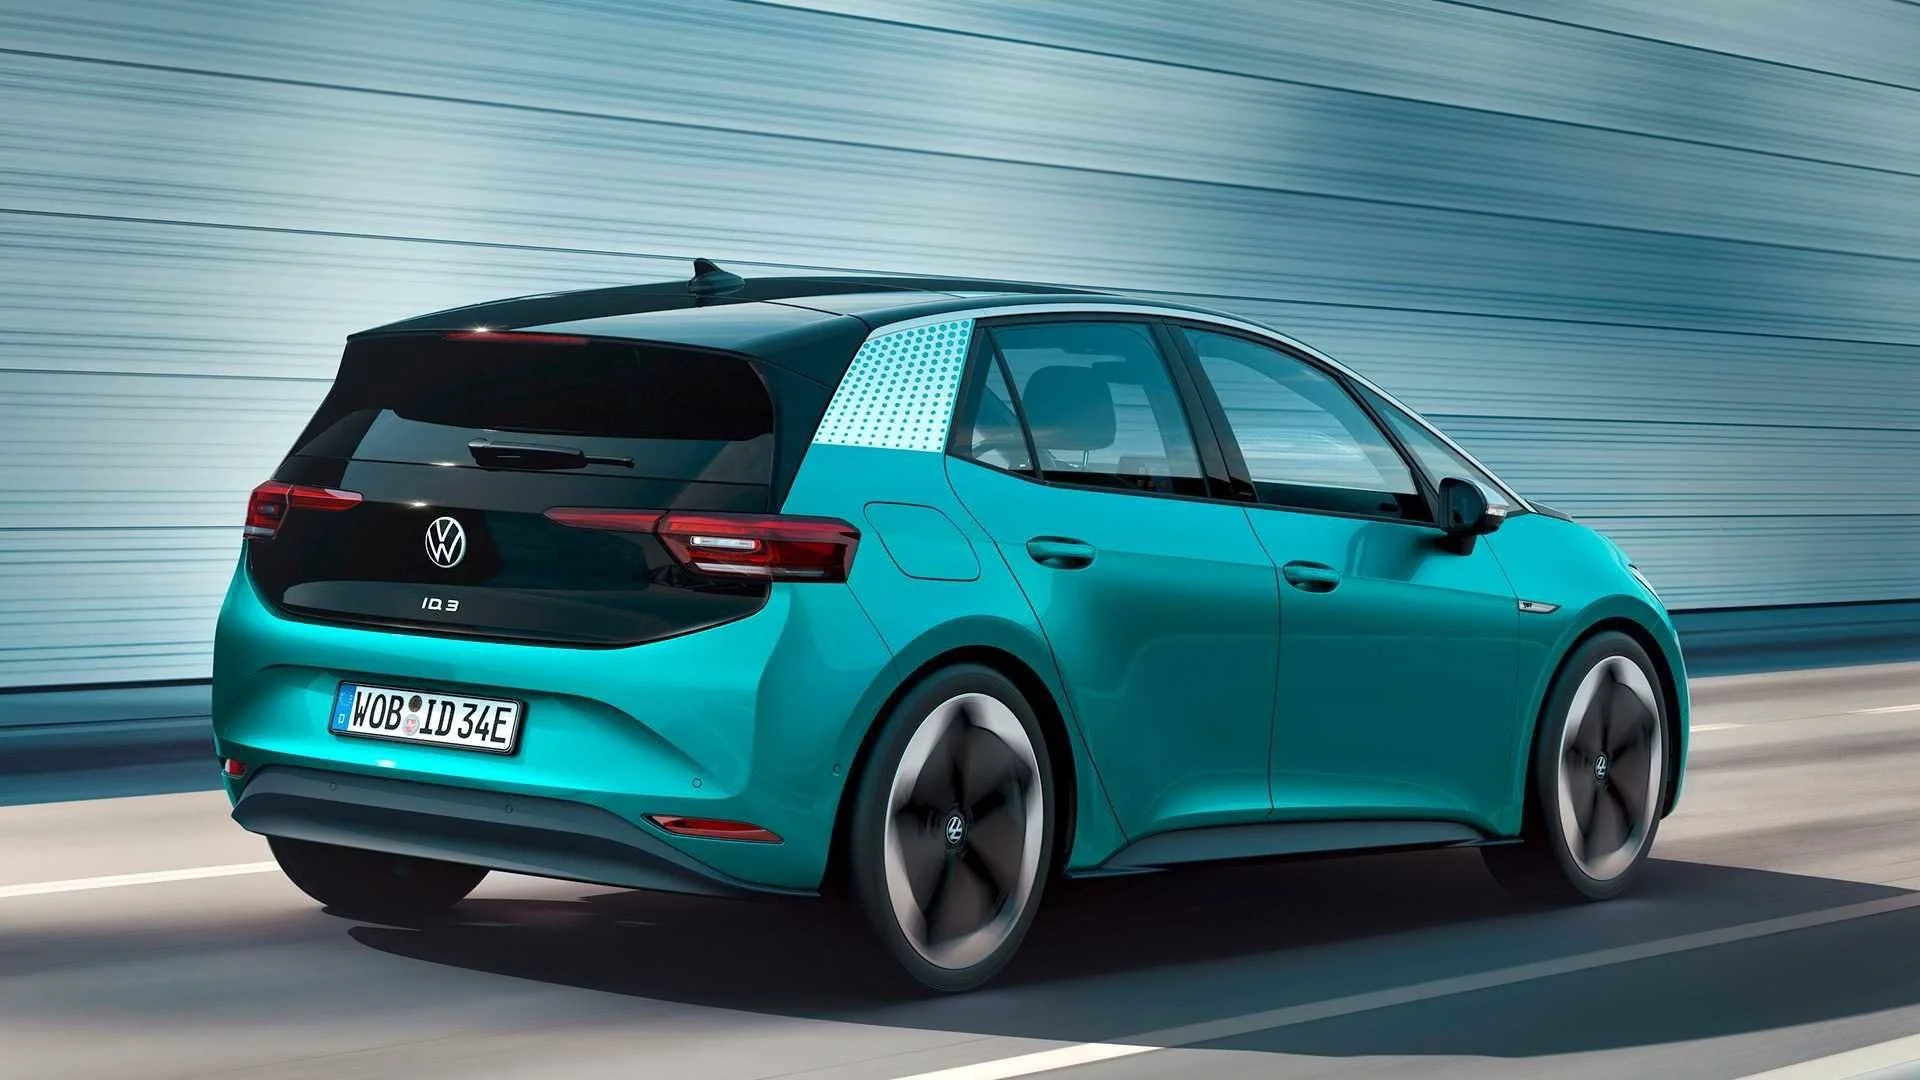 Volkswagen has announced an updated version of its electric car